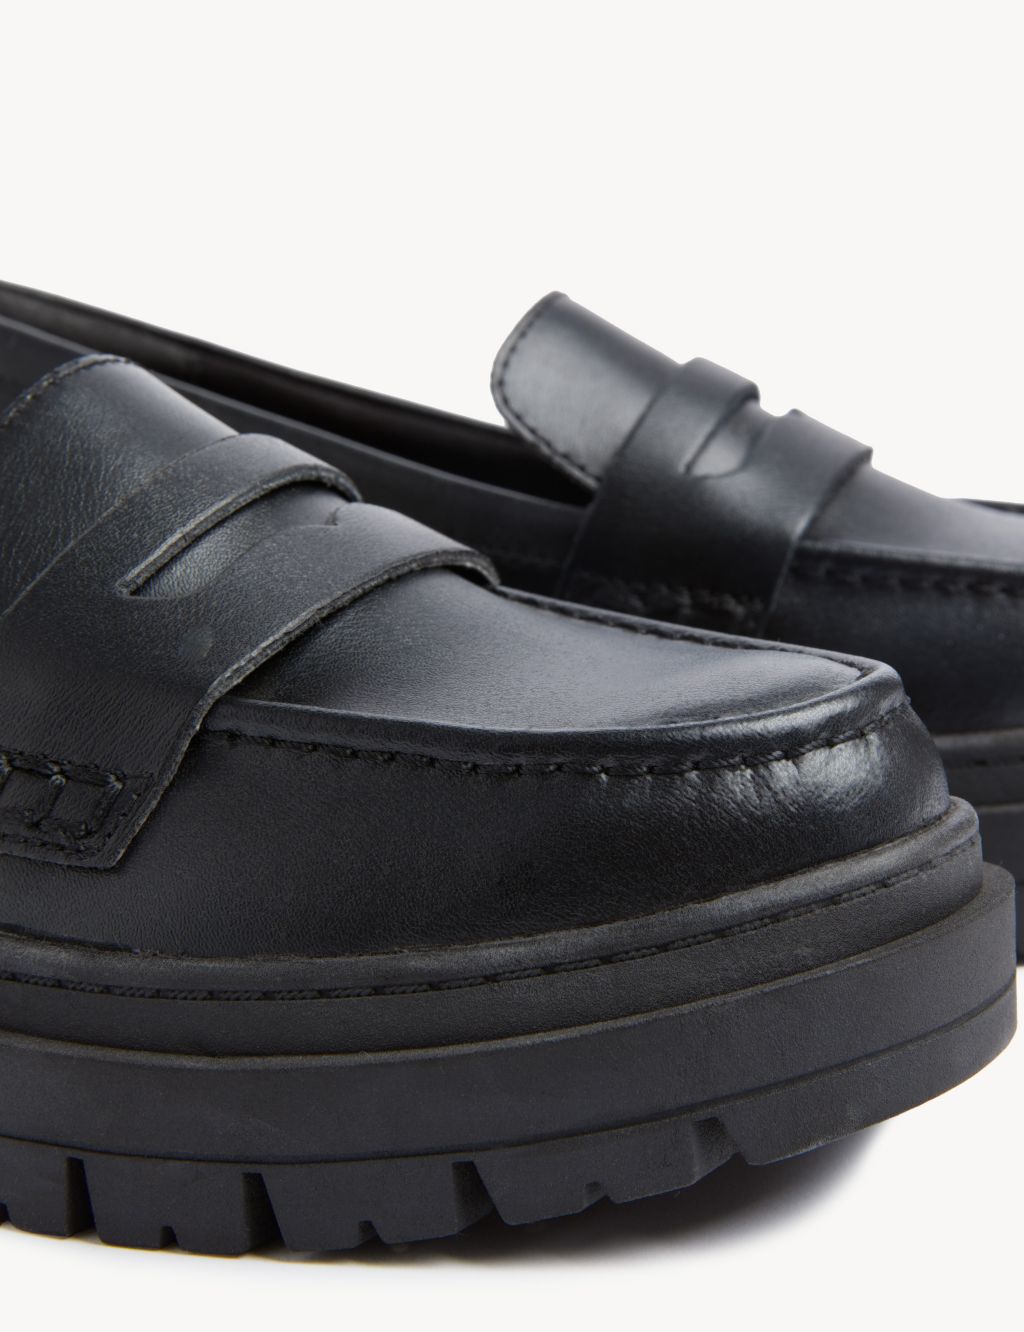 Kids' Leather Chunky School Loafer (13 Small - 7 Large) image 3